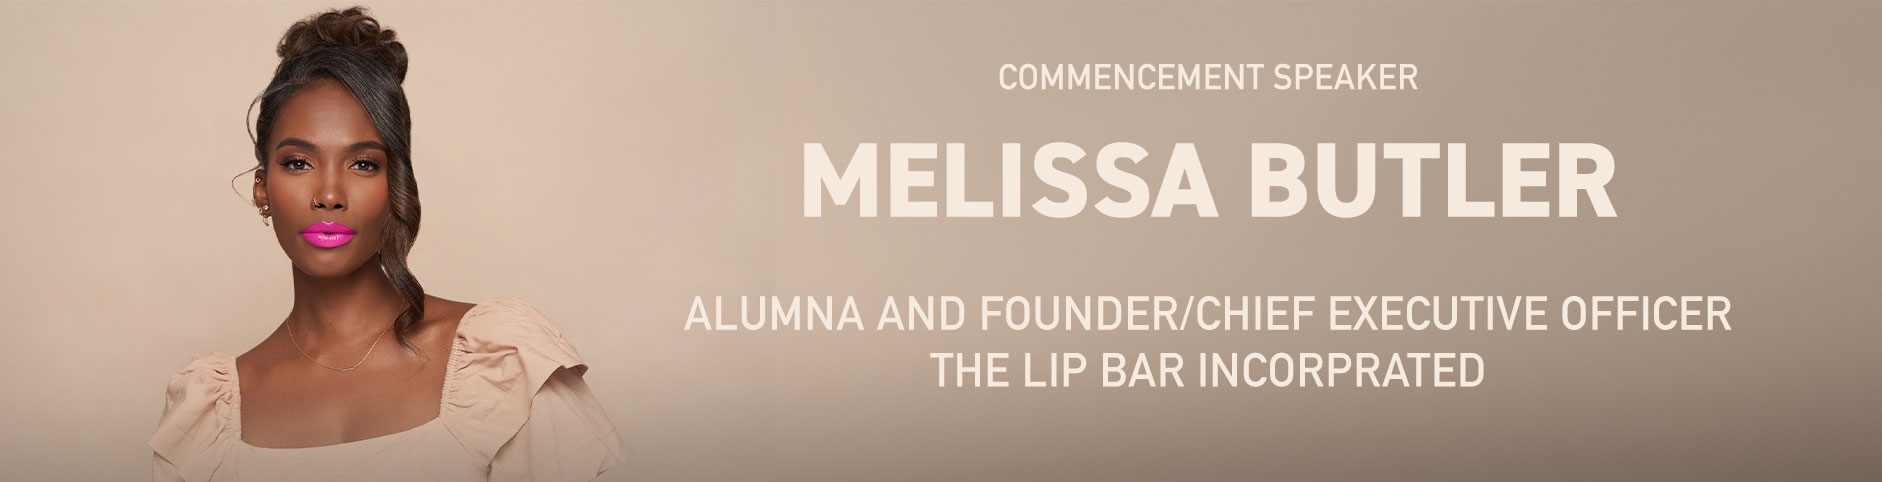 Commencement Speaker Melissa Butler  Alumna and founder/chief executive officer the lip bar incorprateD